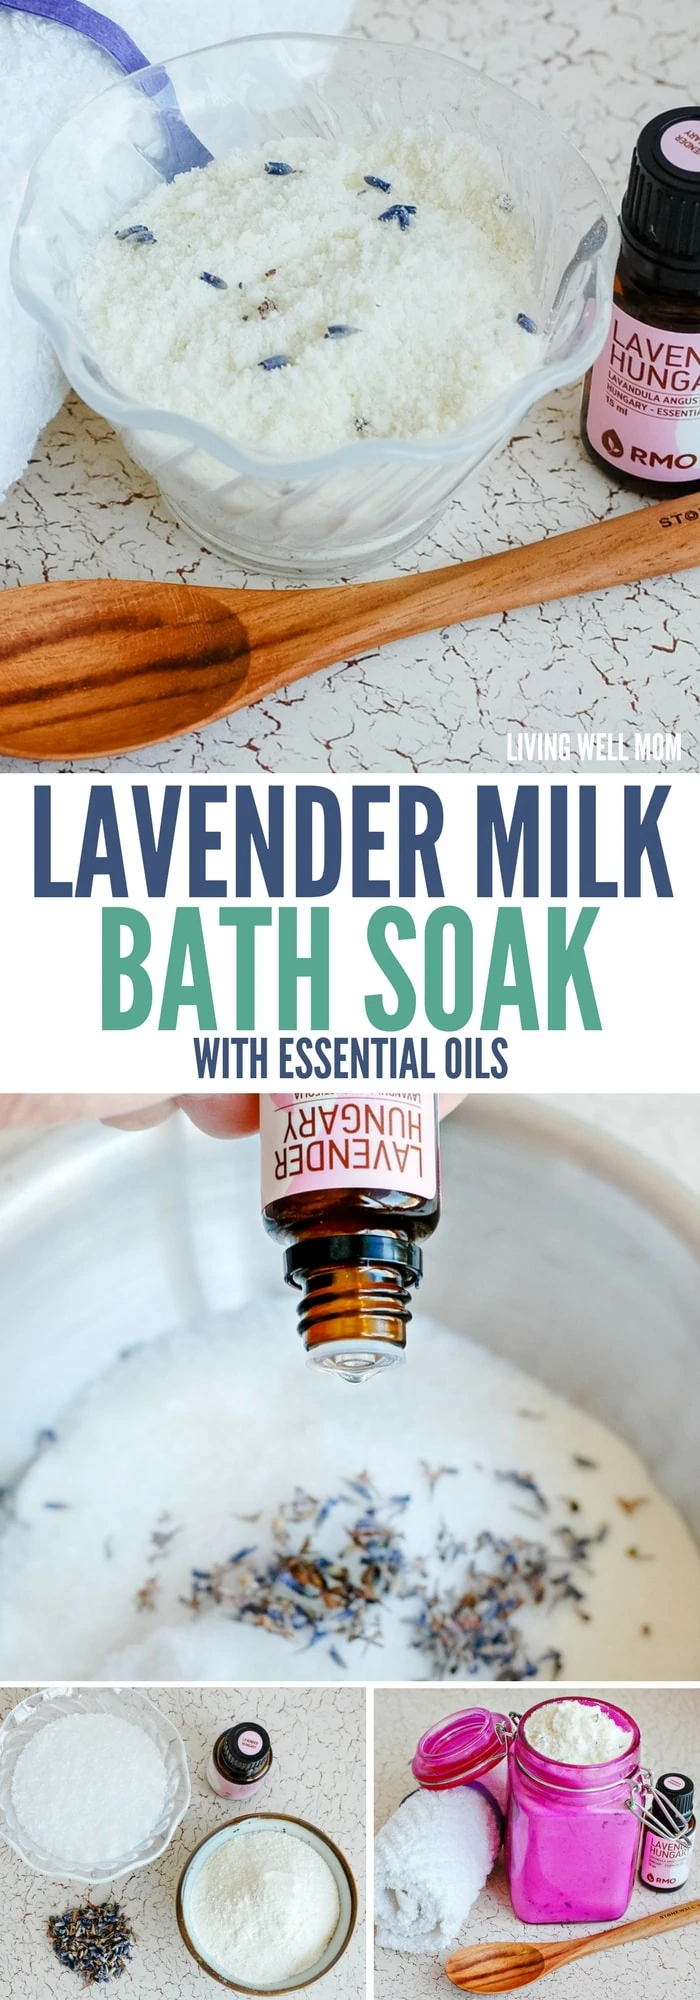 Treat yourself to a relaxing all-natural Lavender Milk bath soak using Epsom salts and essential oils. This also makes a wonderful homemade Mother’s Day gift!